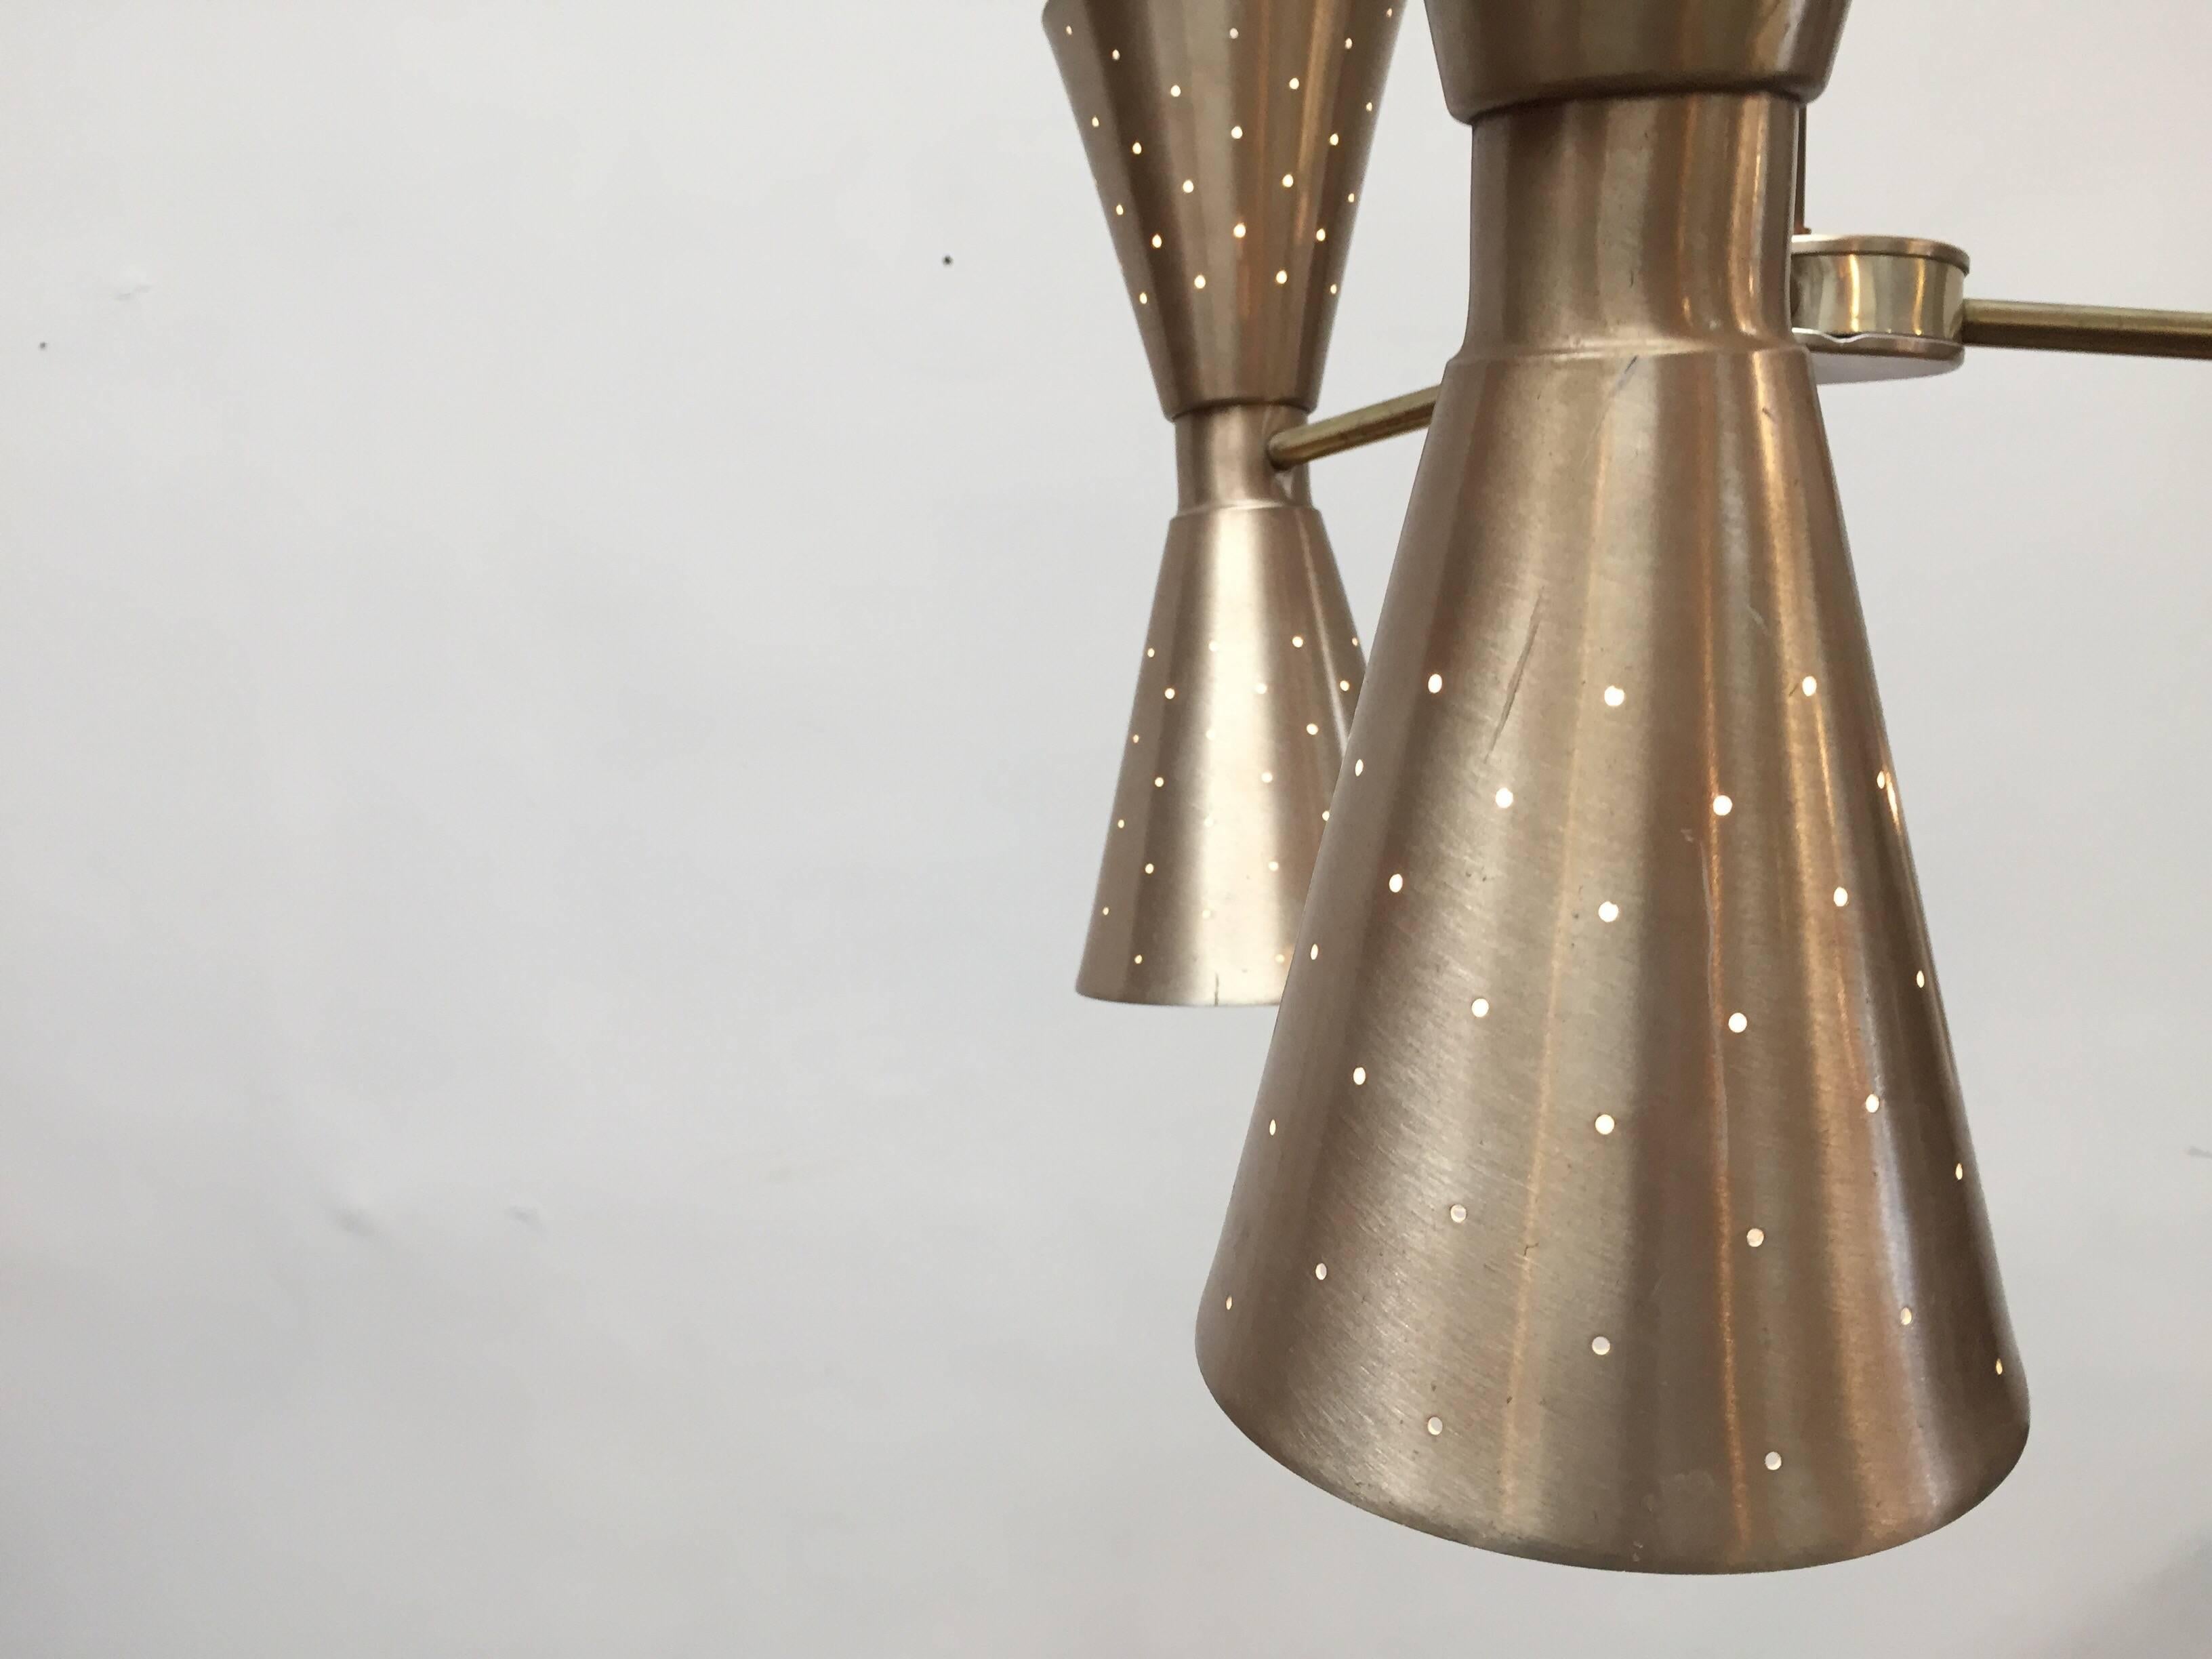 A Gerald Thurston design for Lightolier six lights arms chandelier, produced circa 1950s, with three arms, each supporting dualistic conical shades with perforated details.
Each light cone can be illuminated with the up light and the down light or